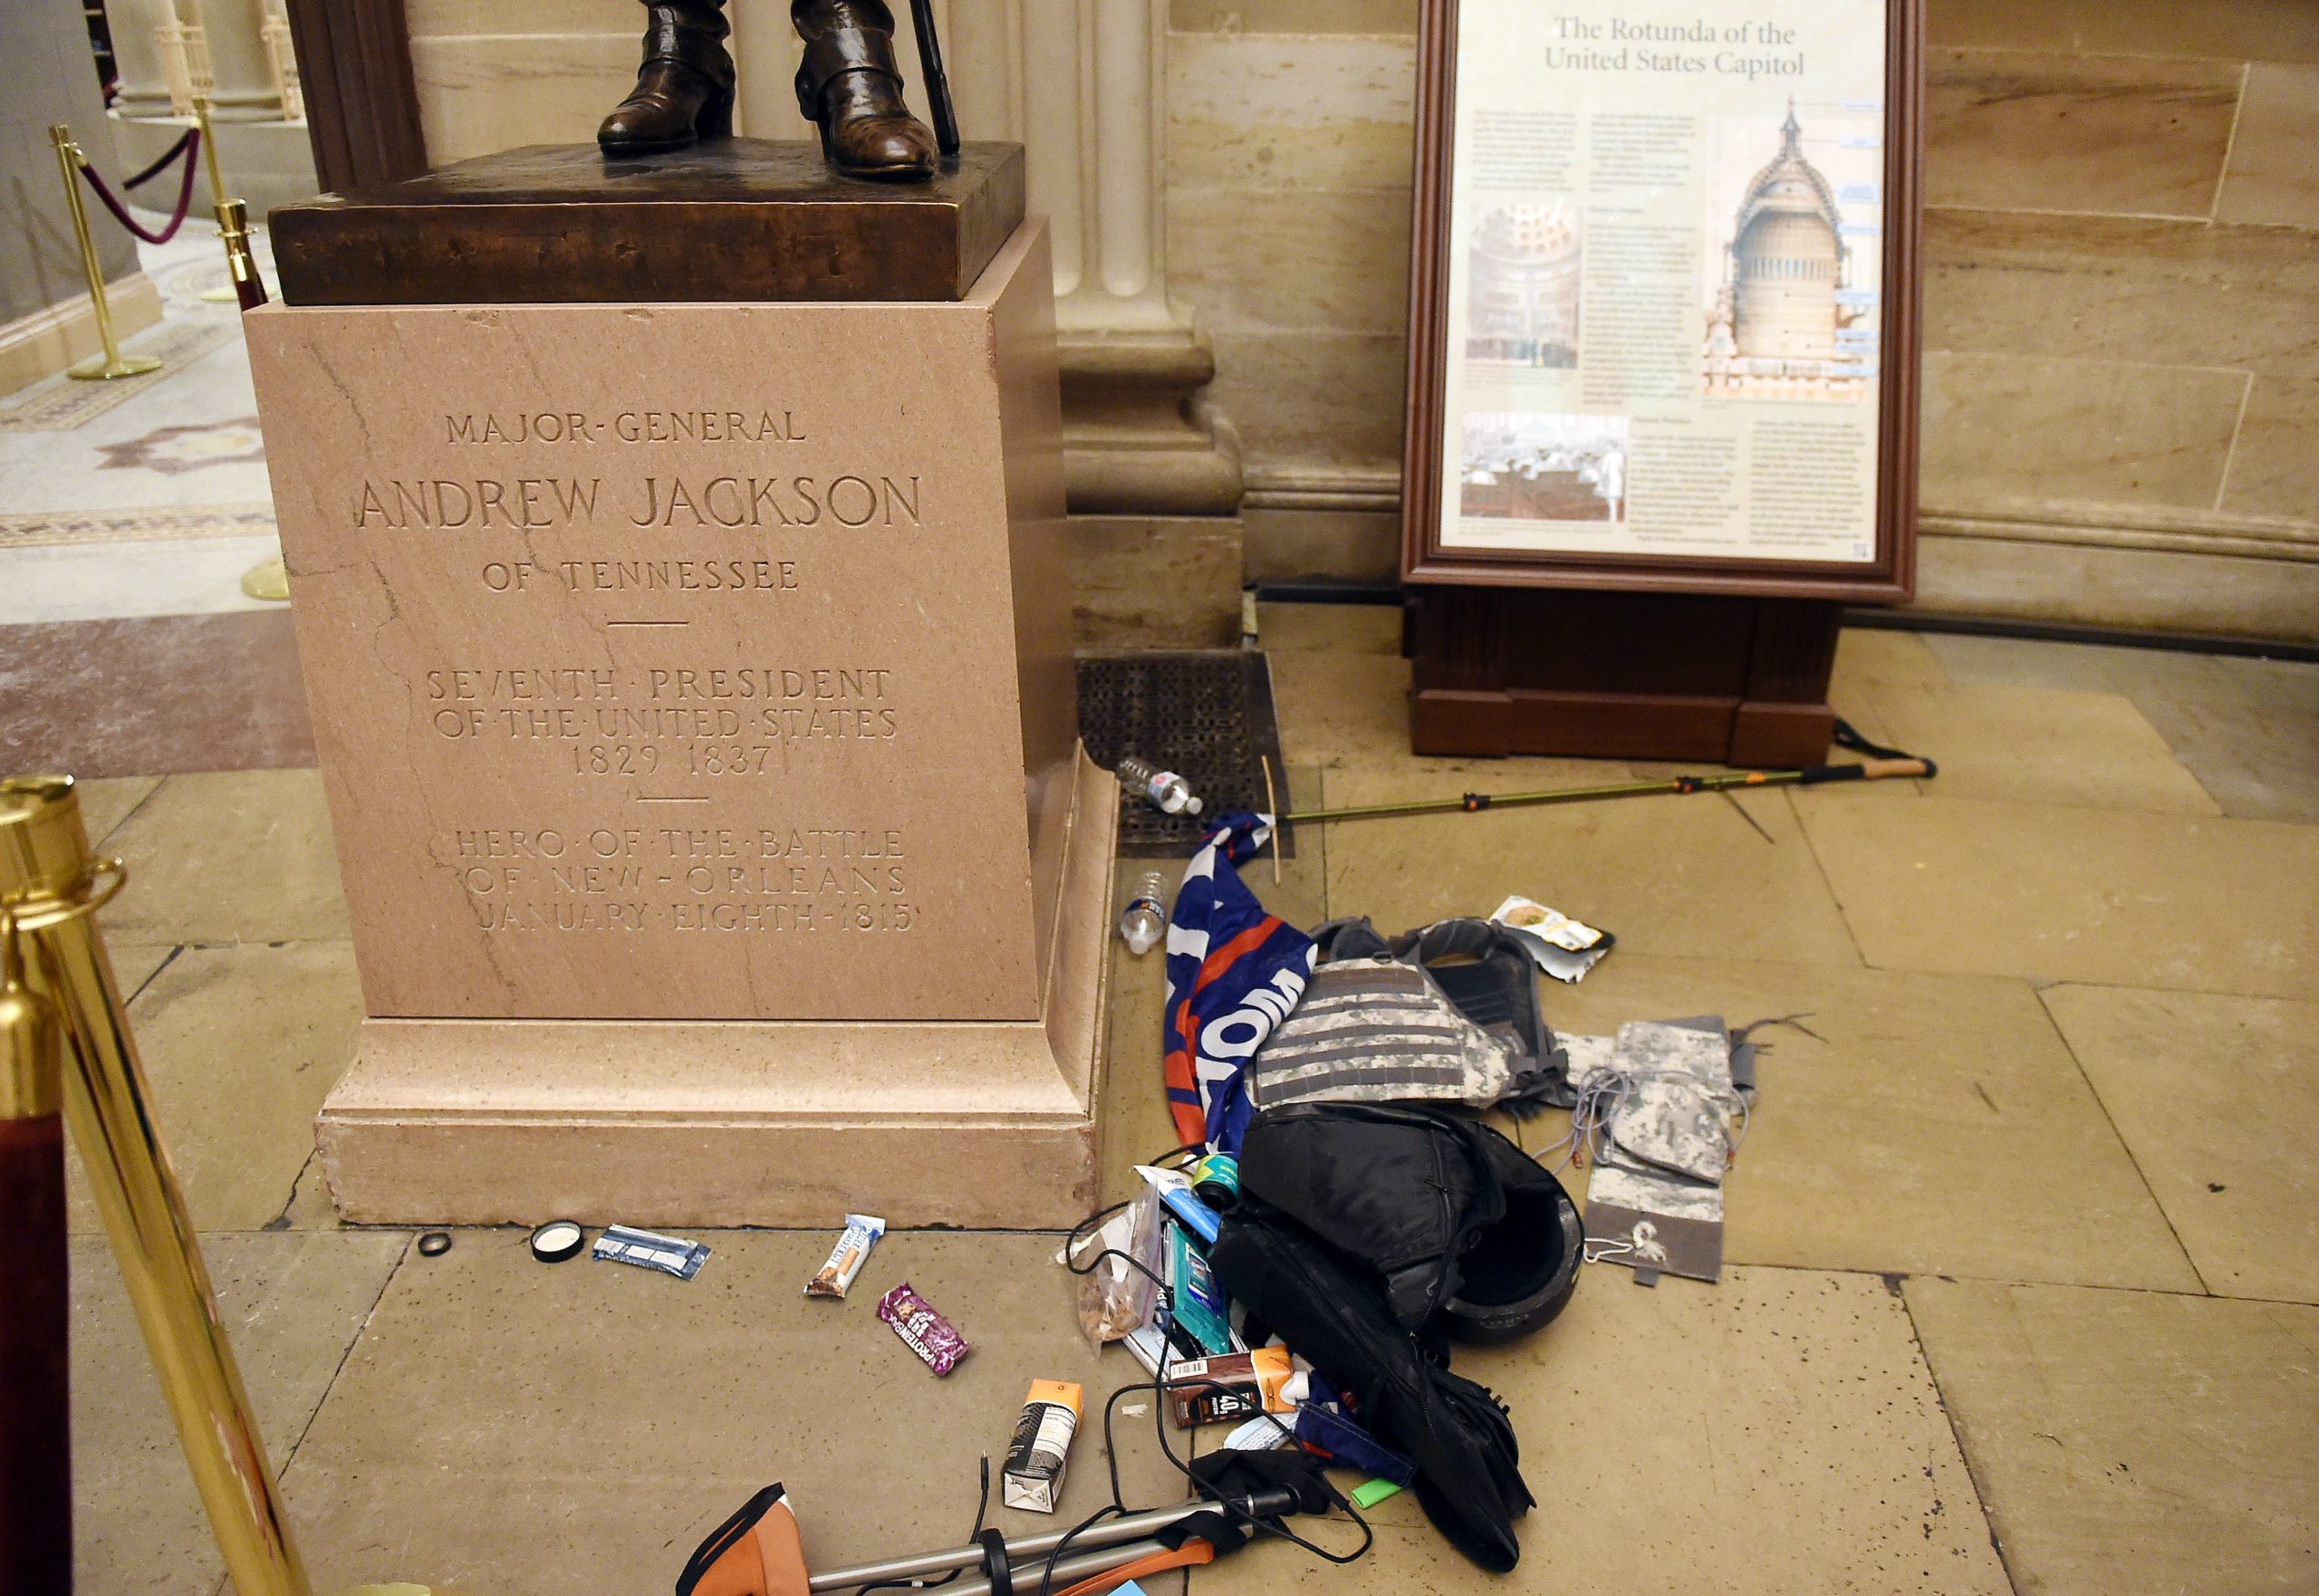 Damage is seen inside the US Capitol building early on January 7, 2021 in Washington, DC, after supporters of US President Donald Trump breeched security and entered the building during a session of Congress. - Donald Trump's supporters stormed a session of Congress held today, January 6, to certify Joe Biden's election win, triggering unprecedented chaos and violence at the heart of American democracy and accusations the president was attempting a coup. (Photo by Olivier DOULIERY / AFP) (Photo by OLIVIER DOULIERY/AFP via Getty Images)